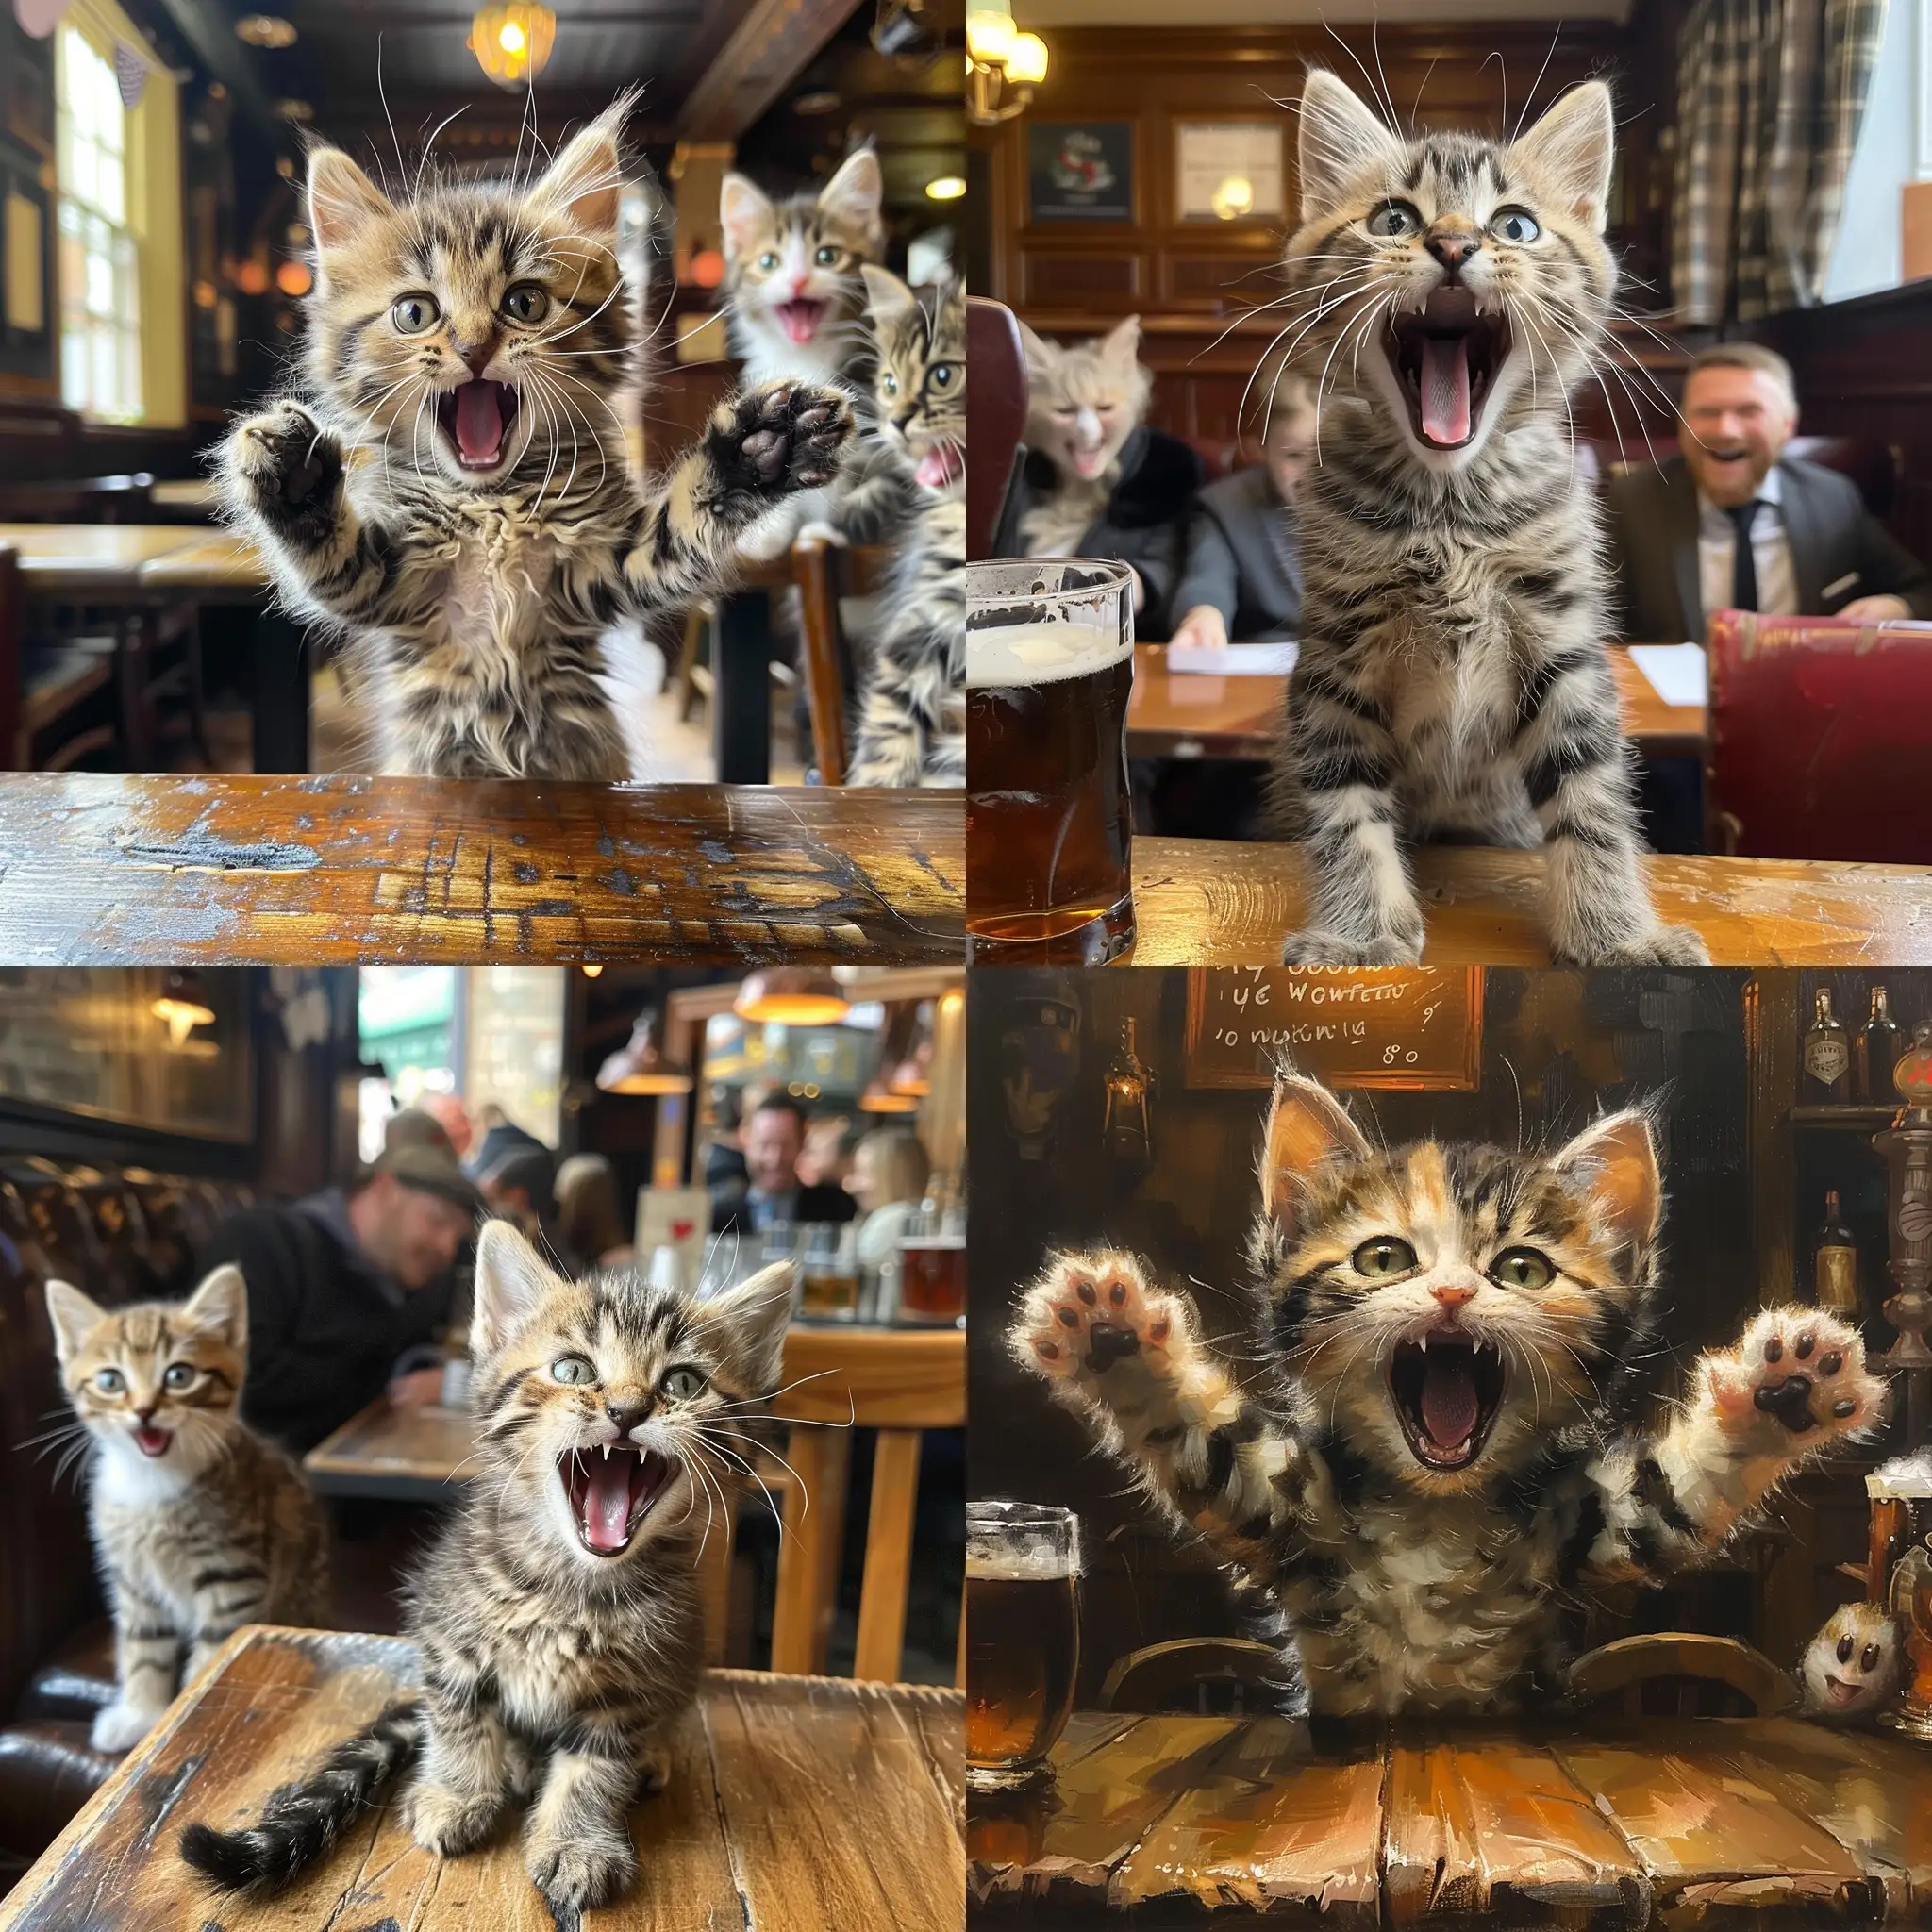 Celebrating-Kitten-Gets-Promotion-with-Friends-at-Pub